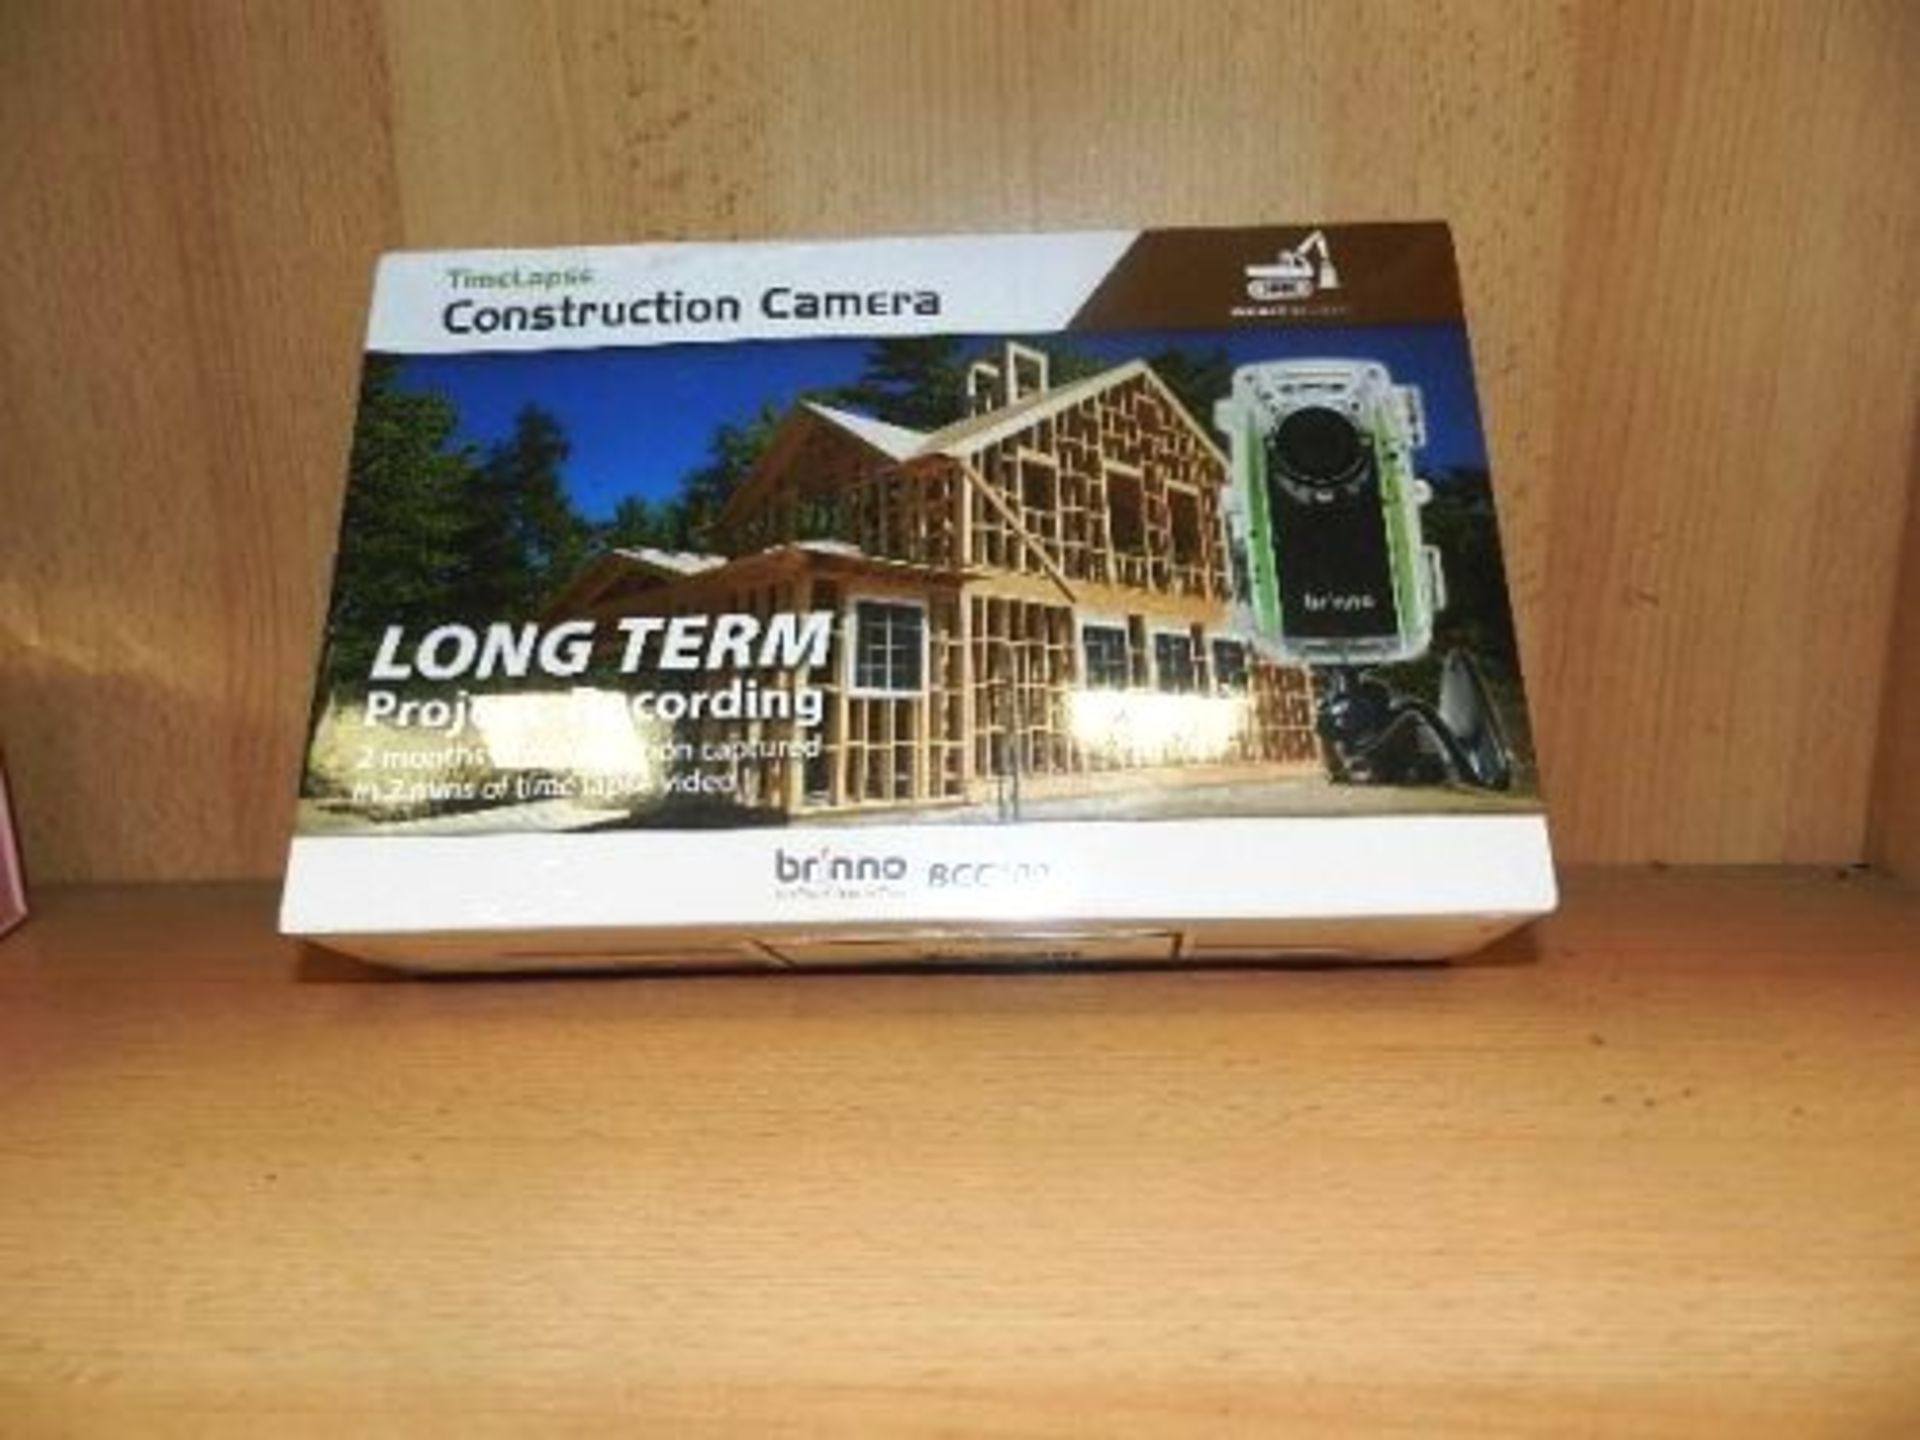 1 x Brinno BCC100 time lapse construction camera - Sealed new in box (C13B)